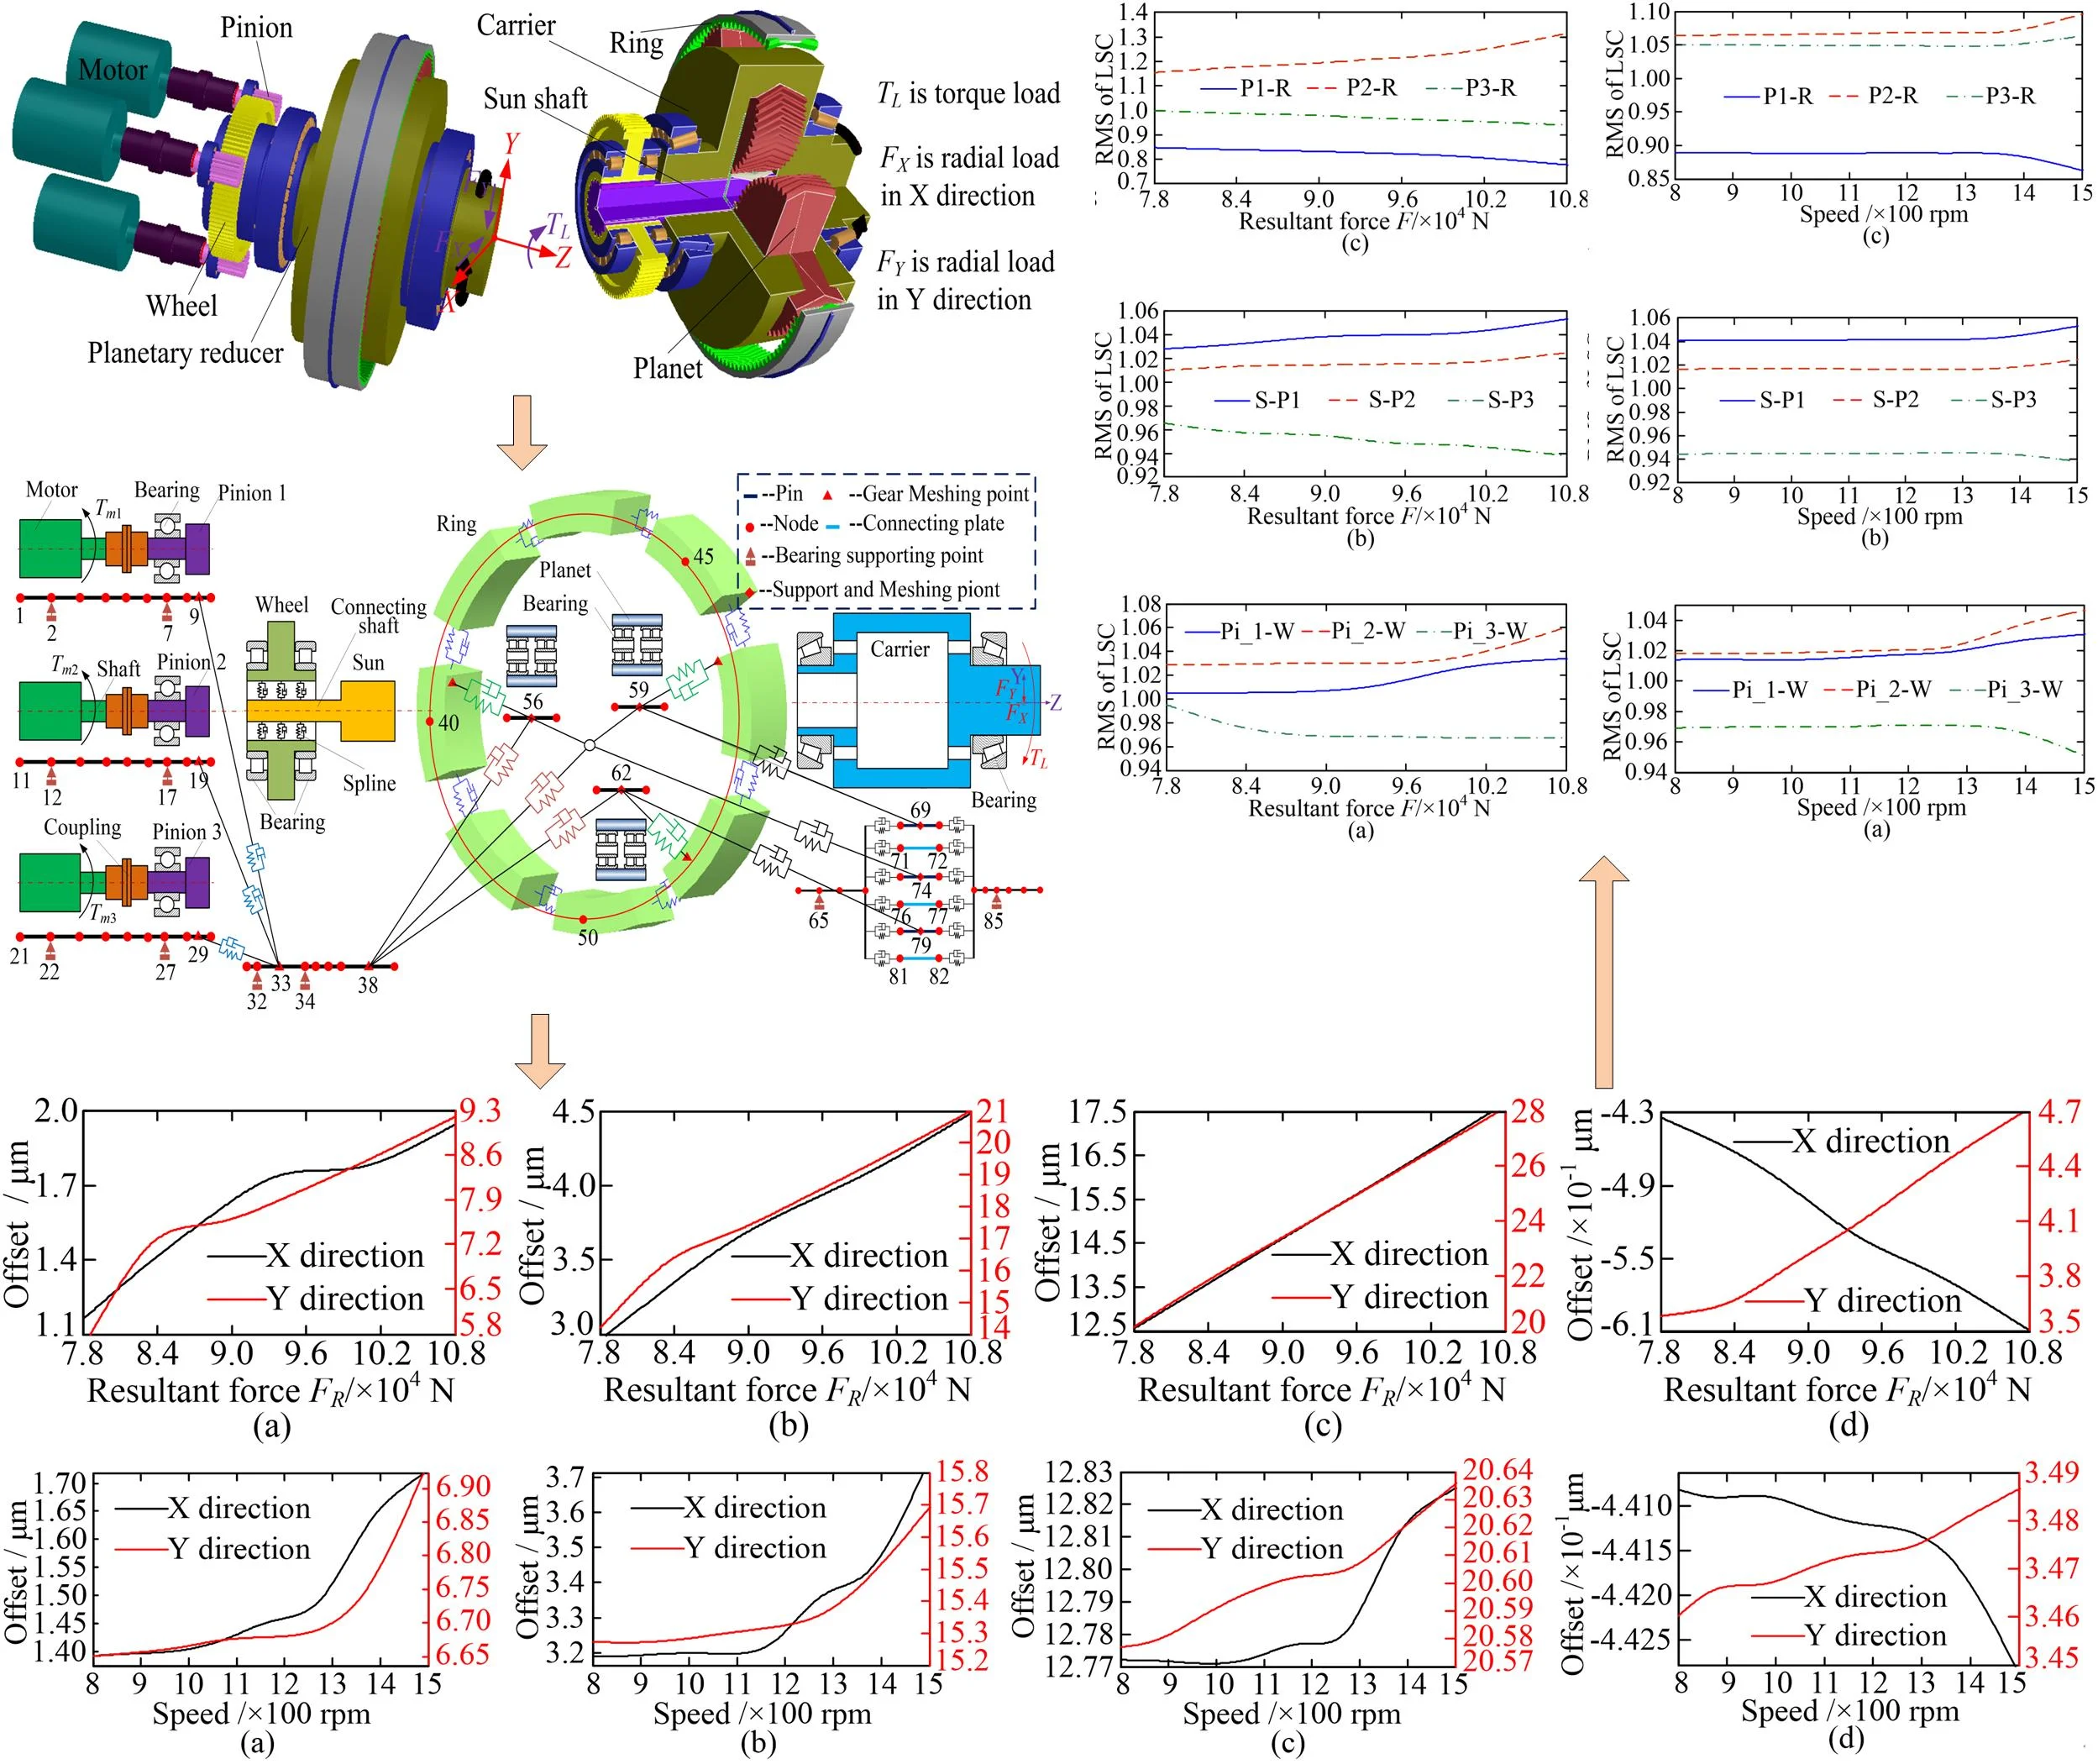 Dynamic characteristic analysis of a multi-power coupling transmission system considering non-torque loads